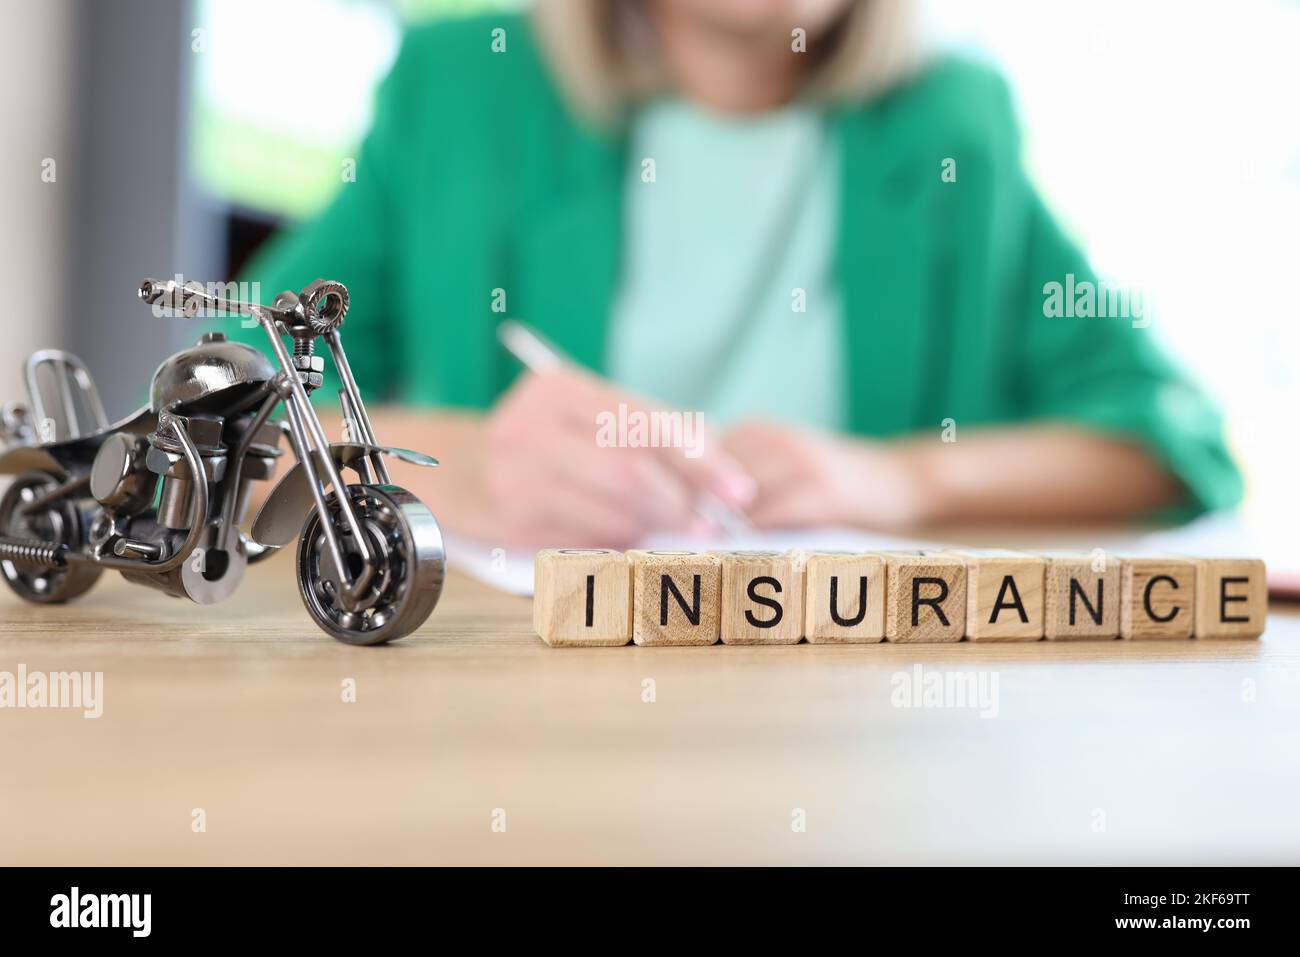 Motorcycle model and word insurance on table, blurred manager with documents in background. Stock Photo